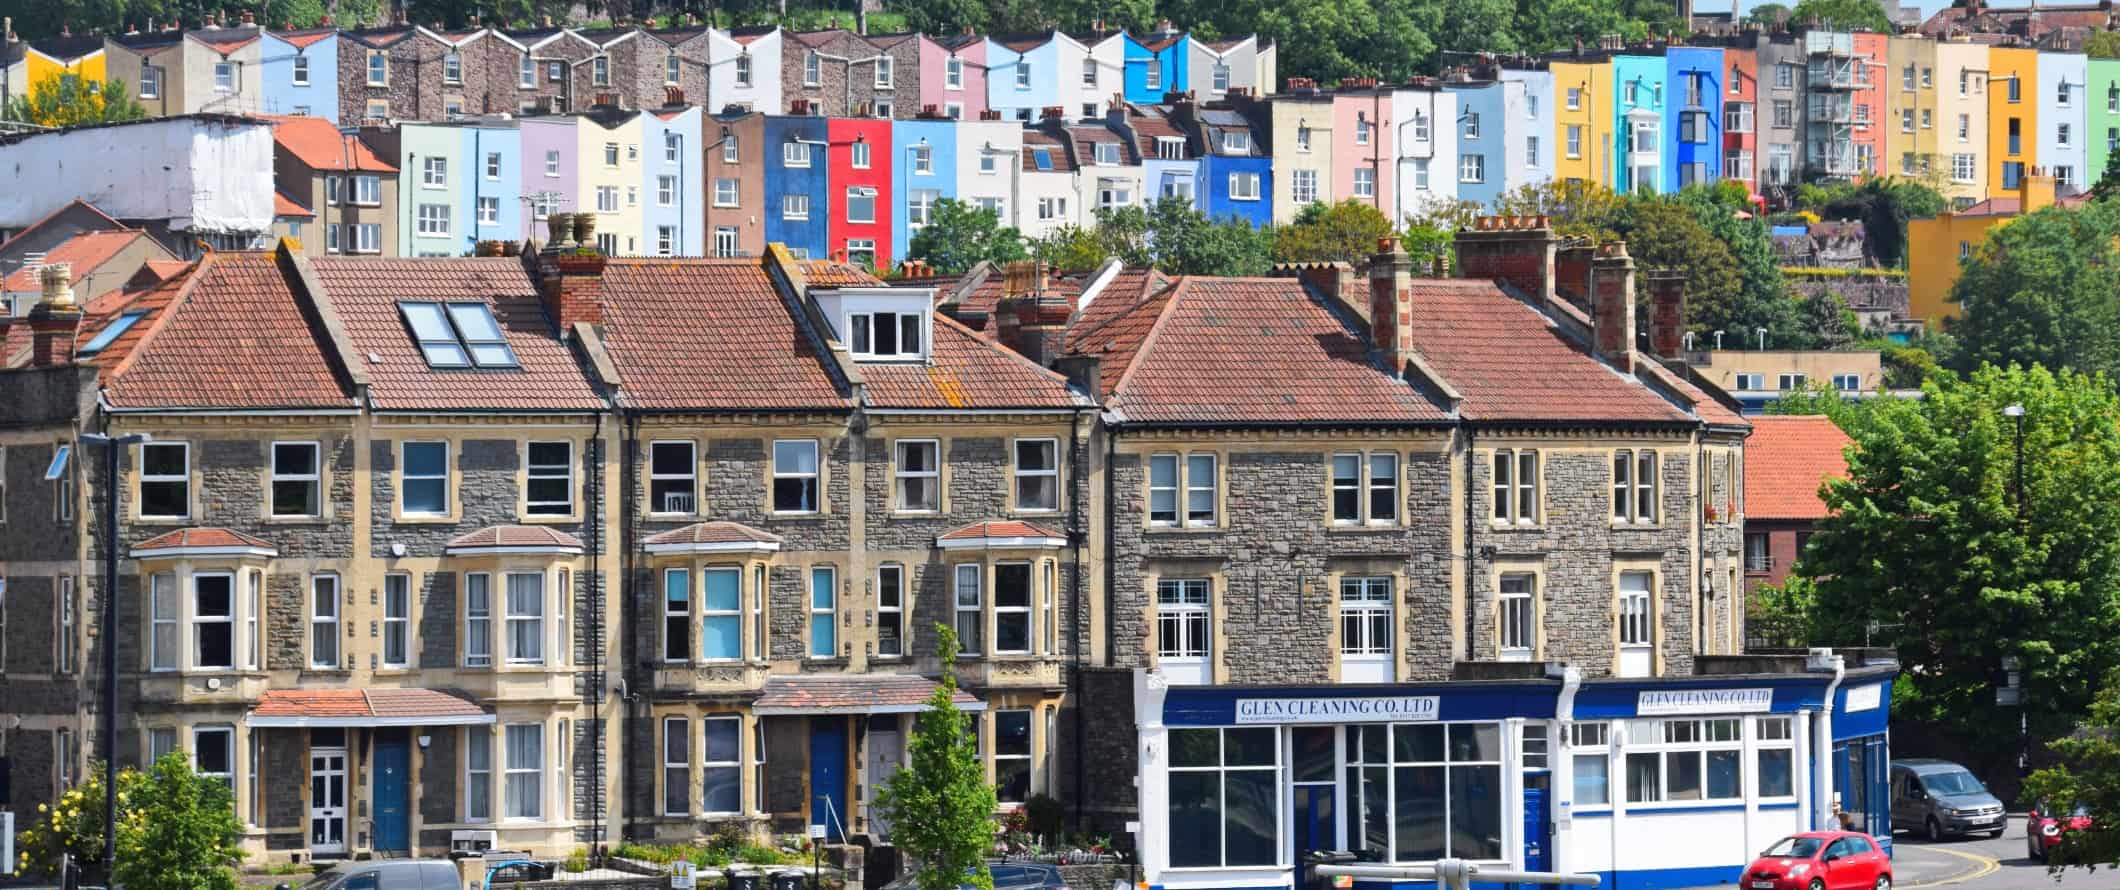 Tiers of colorful townhouses set into the hill in Bristol, England